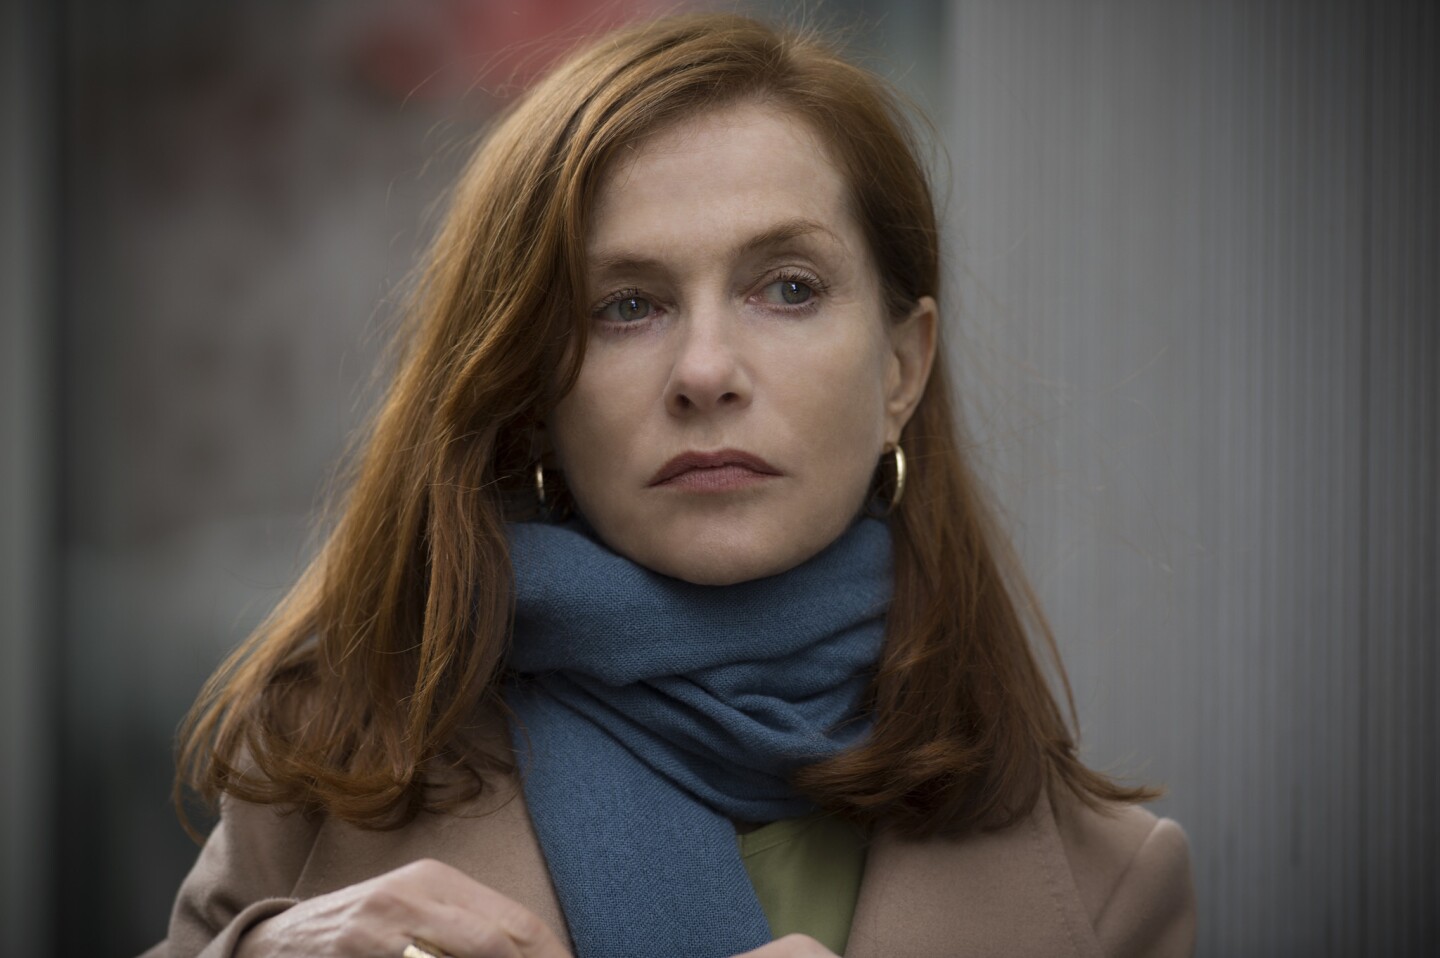 NOMINATED: Actress in a leading role - Isabelle Huppert